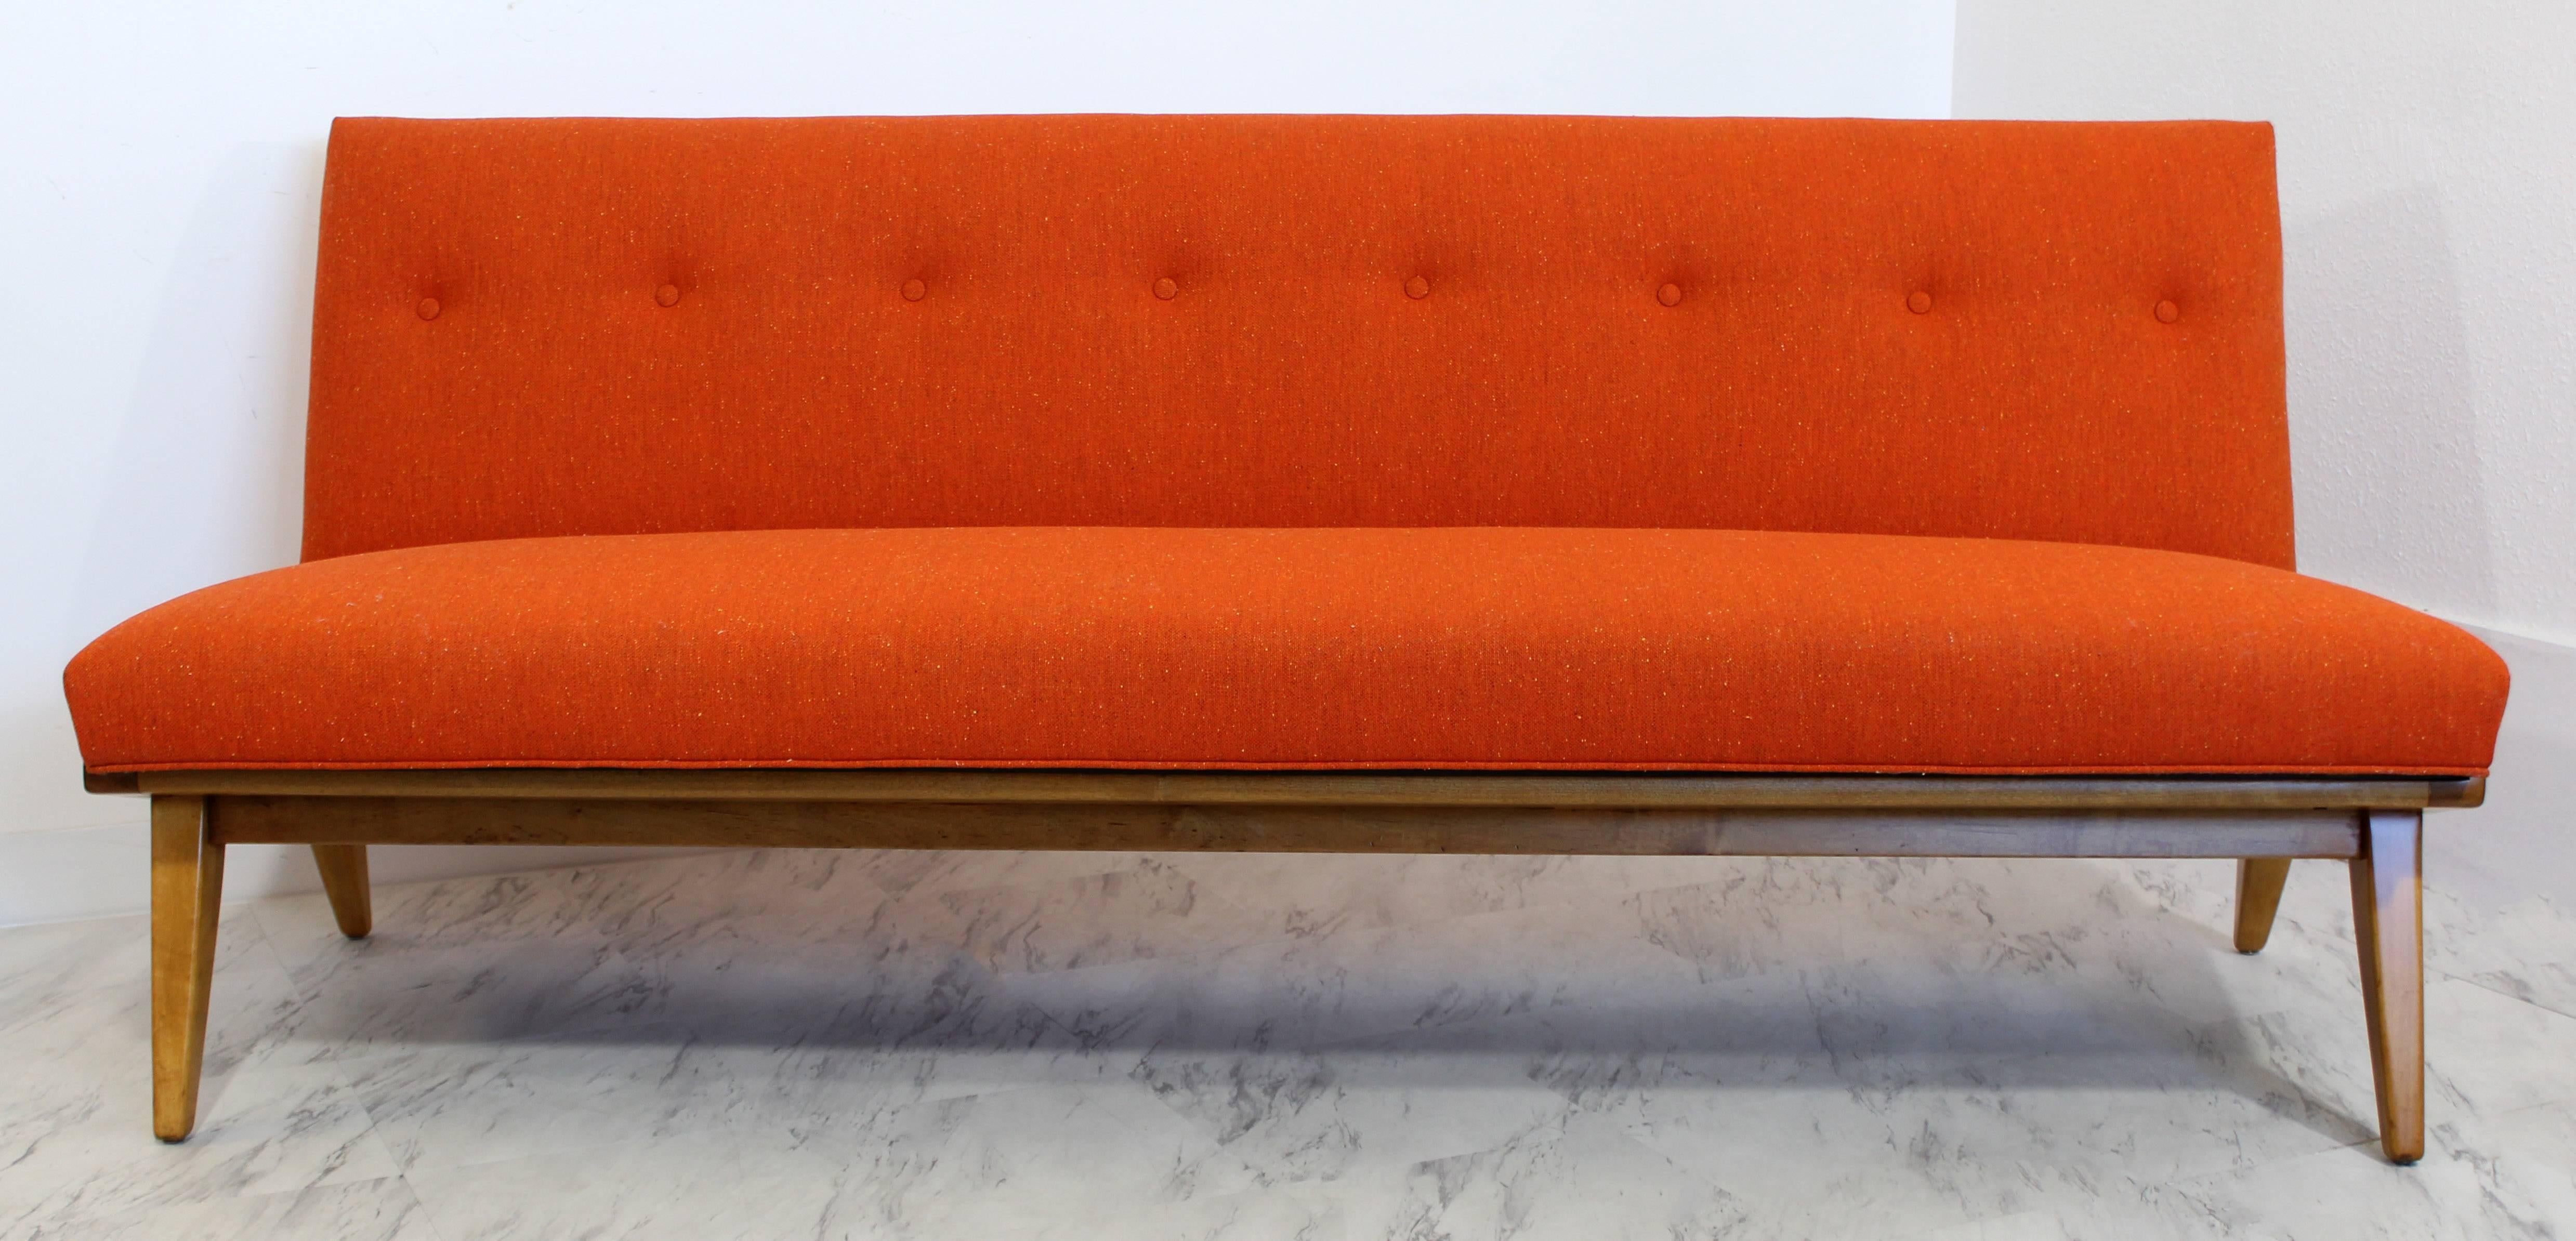 For your consideration is an eye-catching sofa, with a vibrant orange fabric, by Jens Risom for Knoll. Just back from the base being professionally refinished and the sofa being professionally reupholstered in beautiful vintage fabric. This amazing